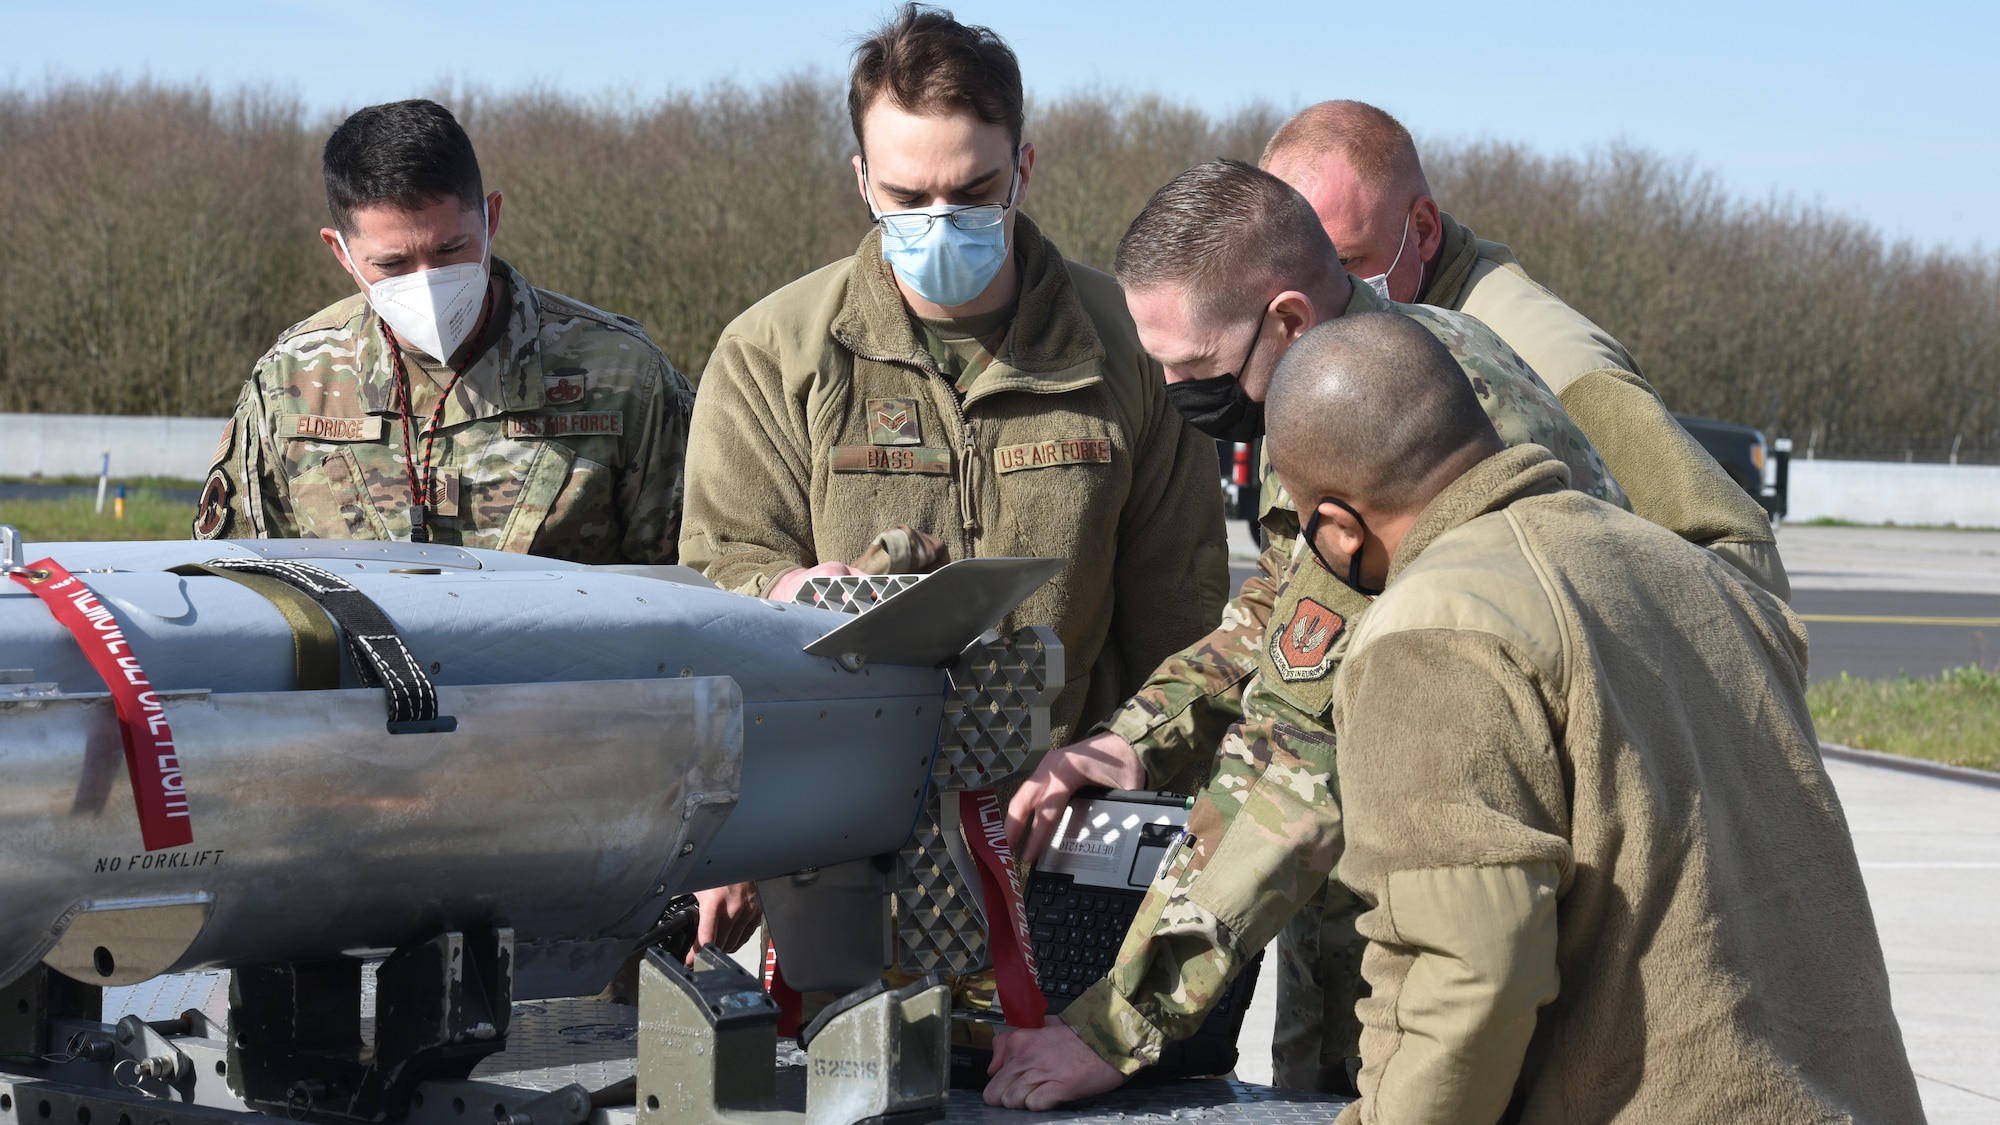 Airmen from the 52nd Fighter Wing perform a pre-load inspection on ADM-160C Miniature Air Launched Decoy missiles during an exercise at Spangdahlem Air Base, Germany, April 27, 2021. The design of the exercise was to further the proficiency of the Airmen executing the wing’s Suppression of Enemy Air Defense mission. (U.S. Air Force photo by Tech. Sgt. Tony Plyler)